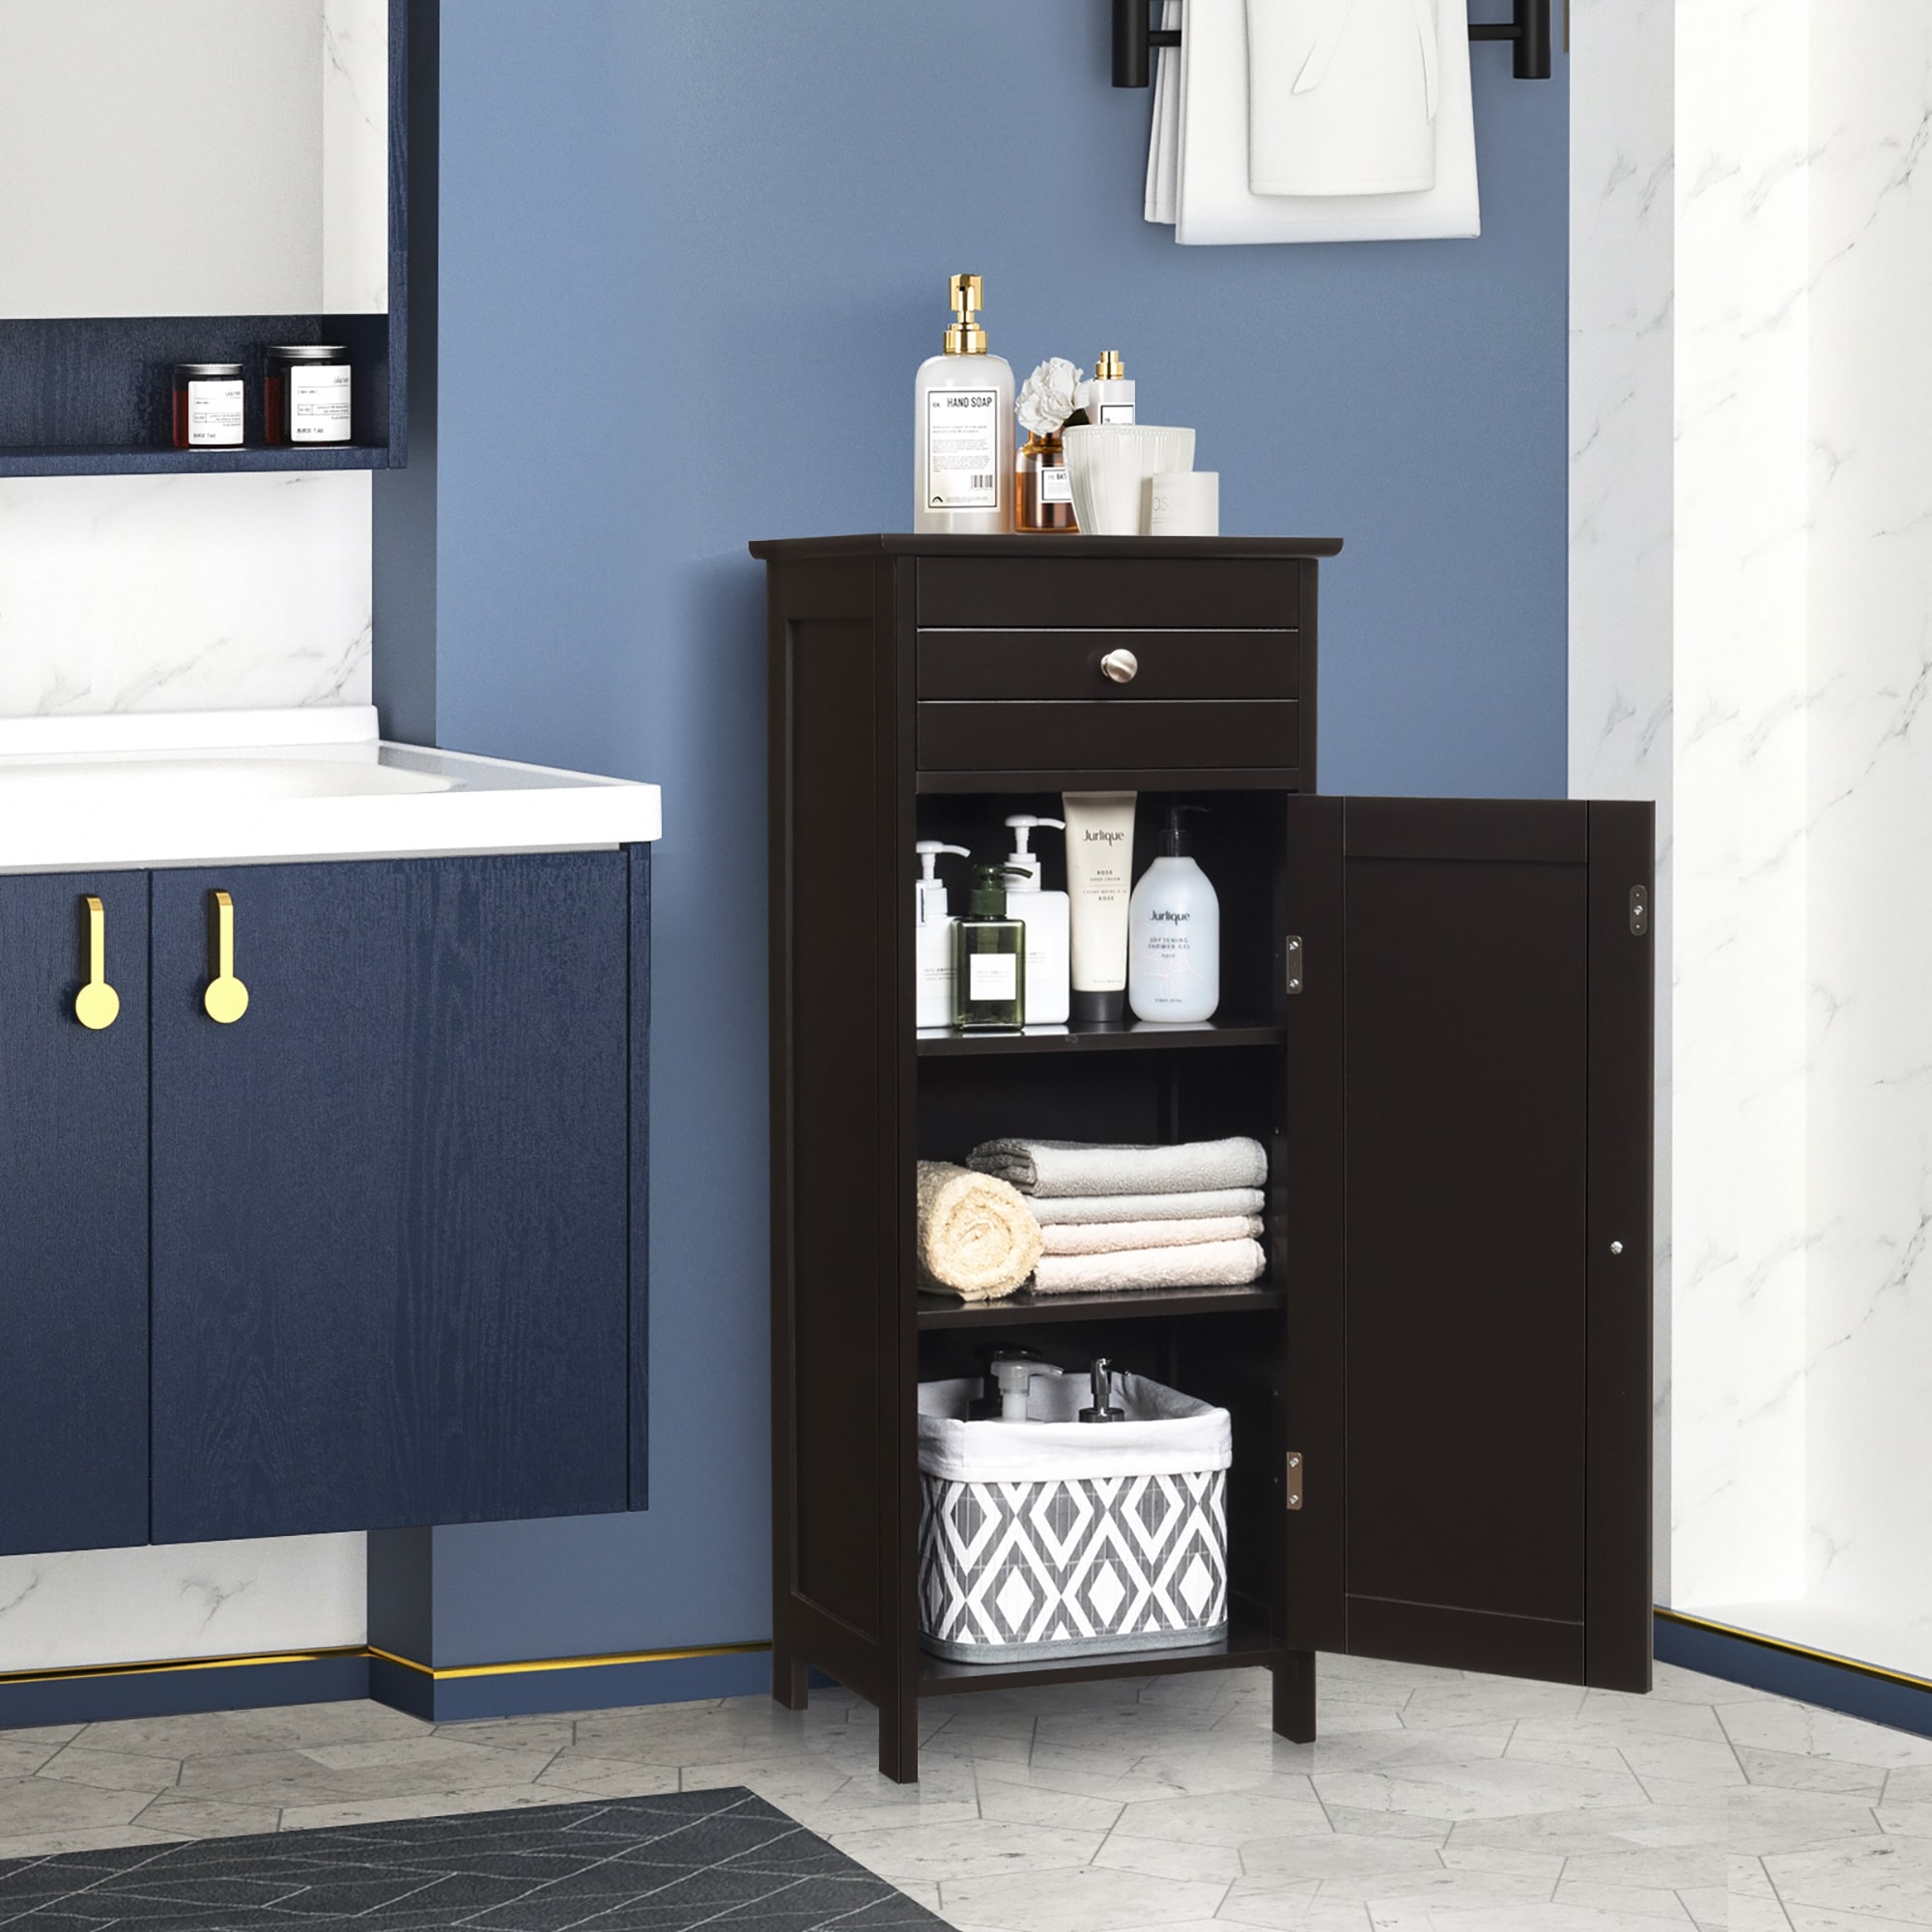 https://ak1.ostkcdn.com/images/products/is/images/direct/77aceee8bd40699caa23fa8d307ae0cfc77e27bb/Costway-Bathroom-Floor-Cabinet-Storage-Organizer-Free-Standing-w-.jpg